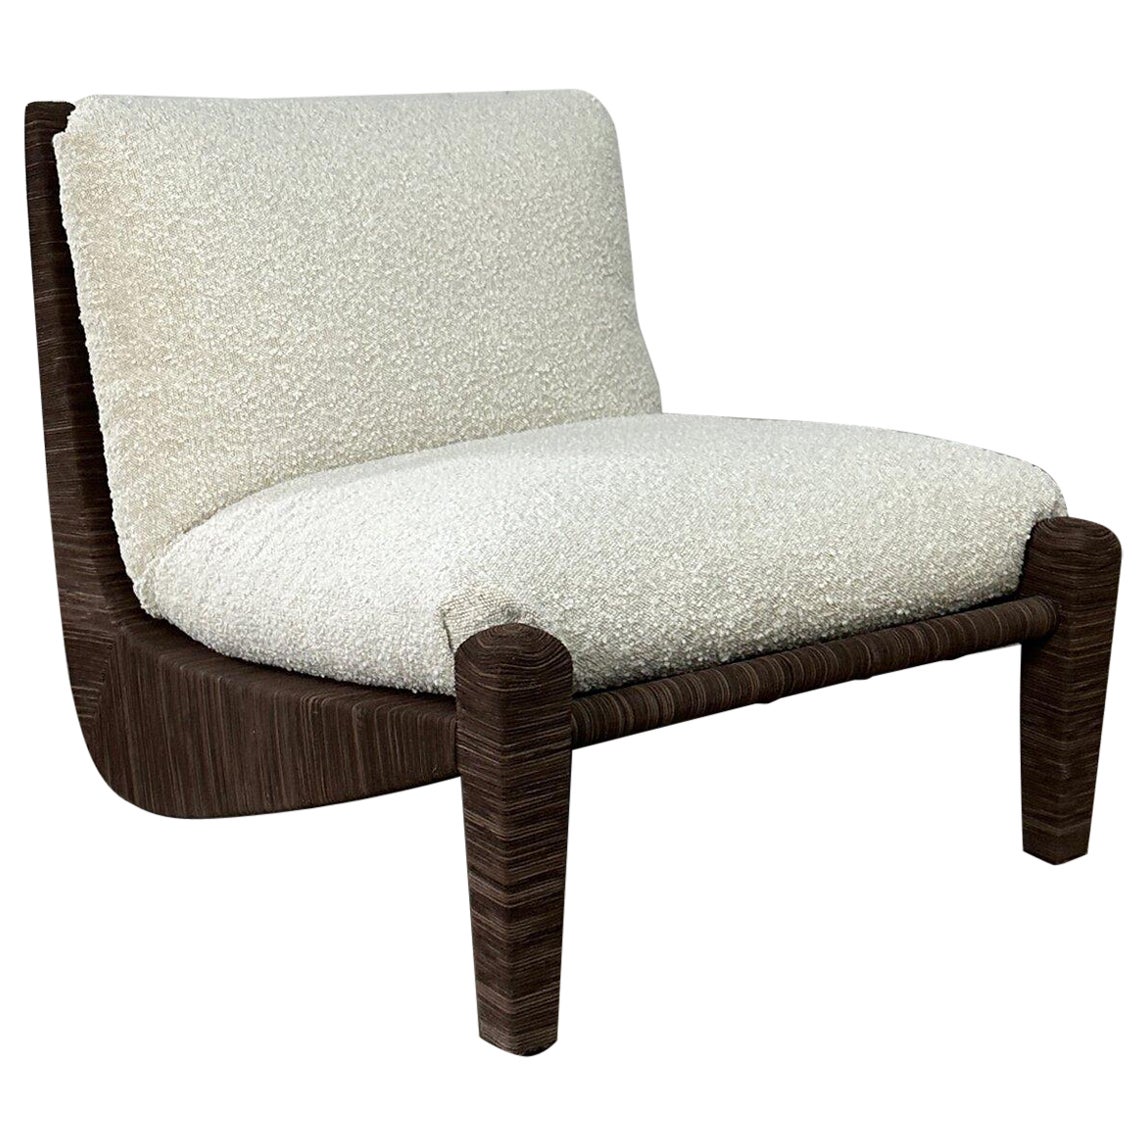 Lashed lounge chair by Baker Furniture